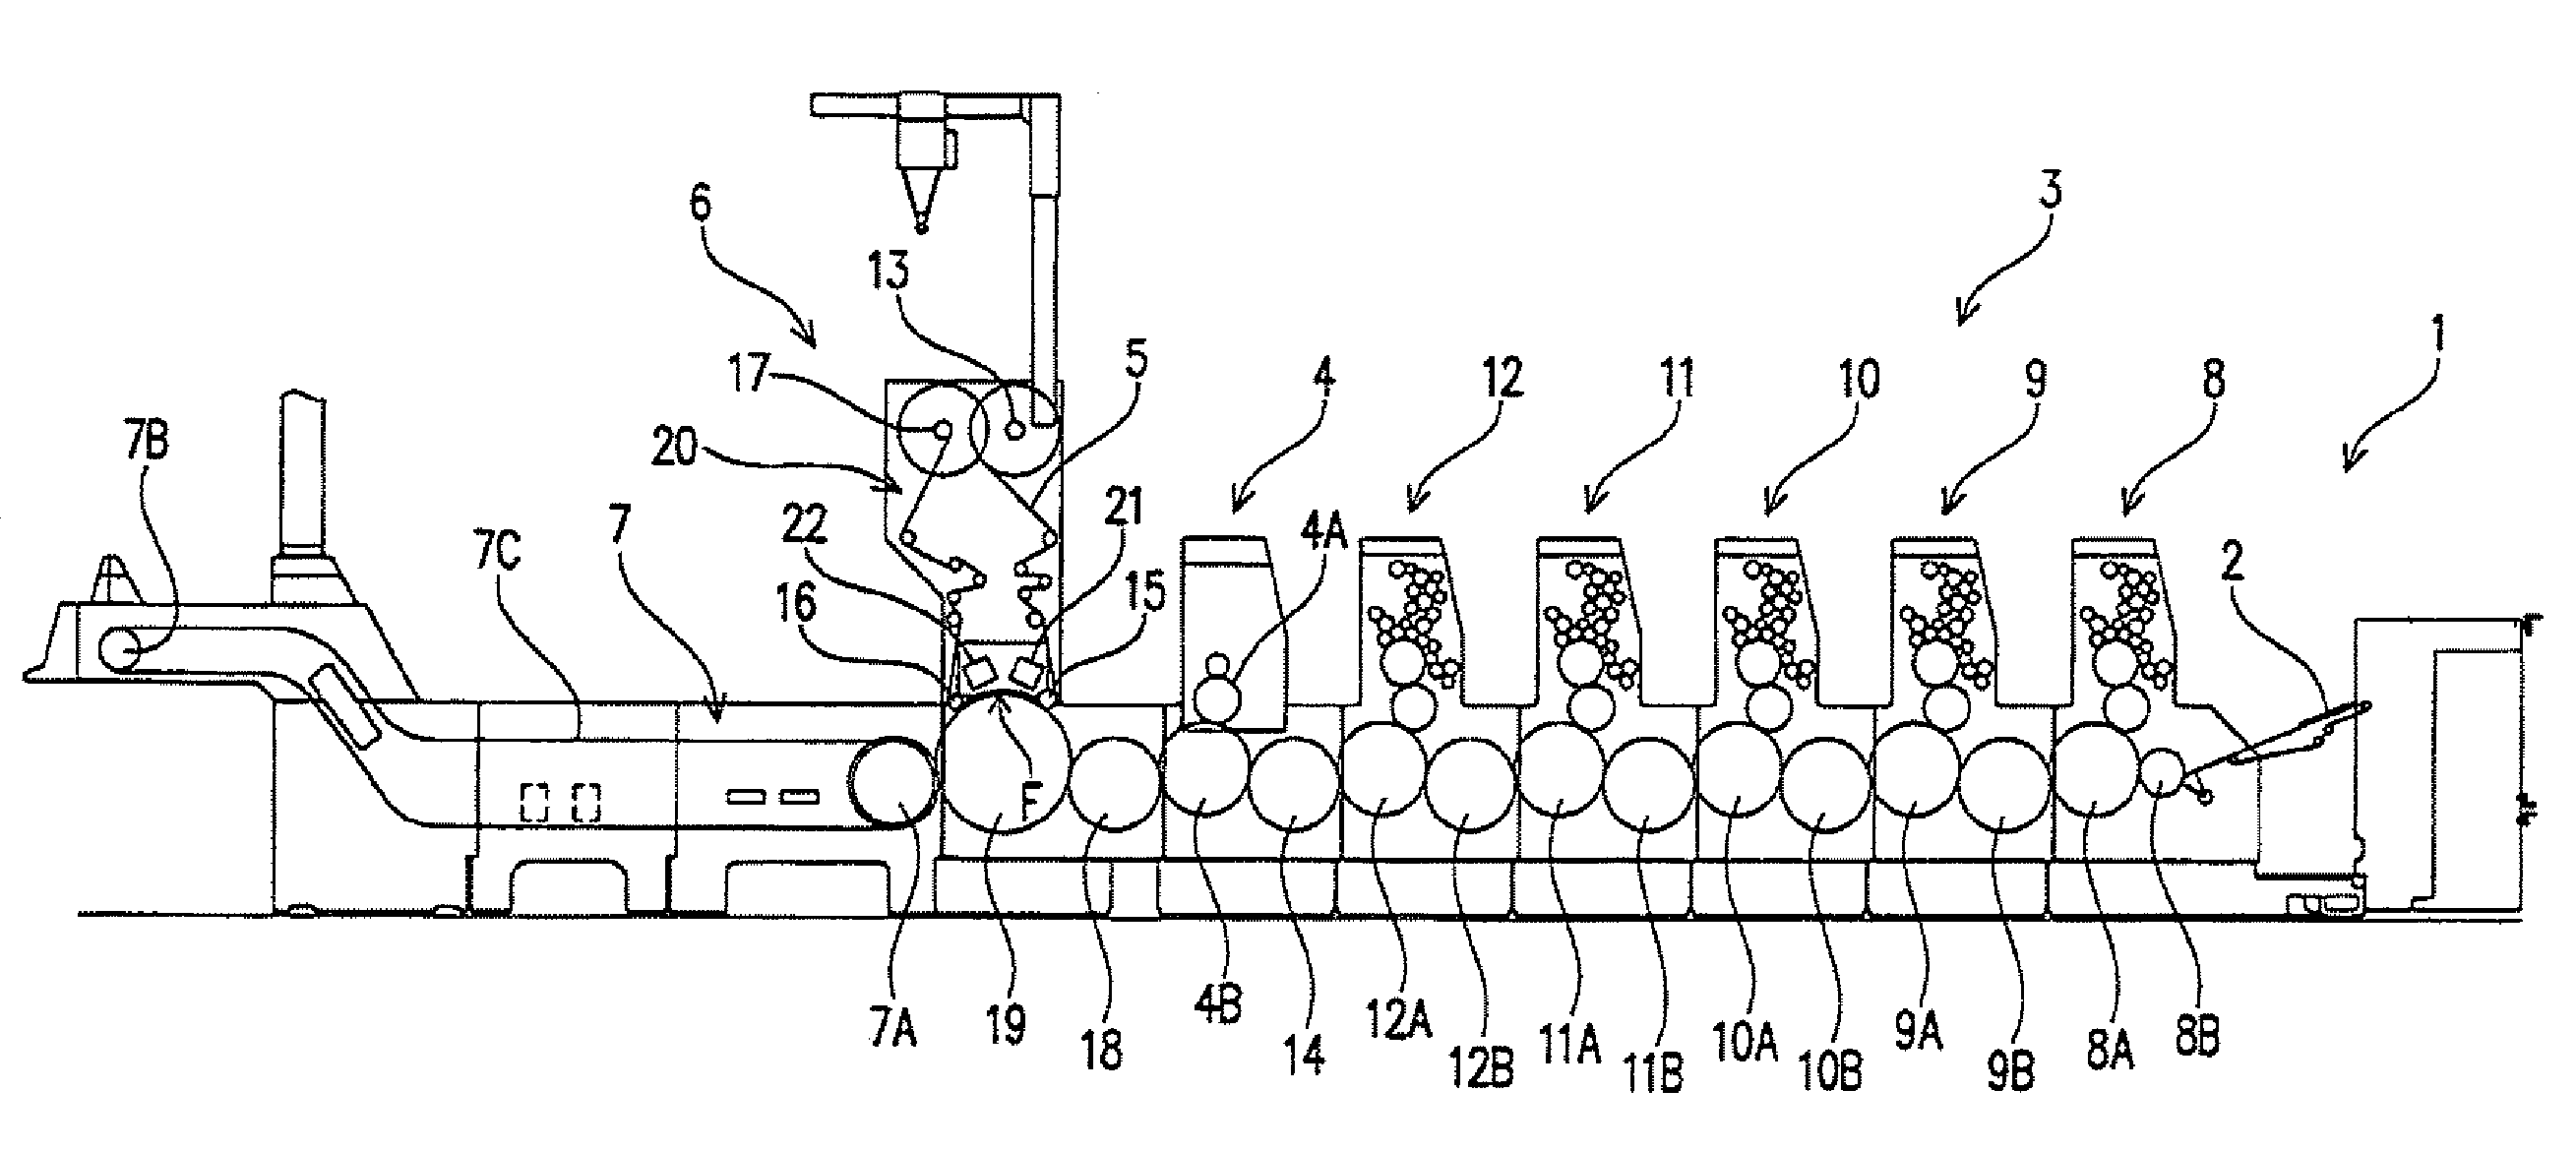 Method of Winding Up Transfer Film and Device for Performing Transfer Printing on Printed Sheets of Paper